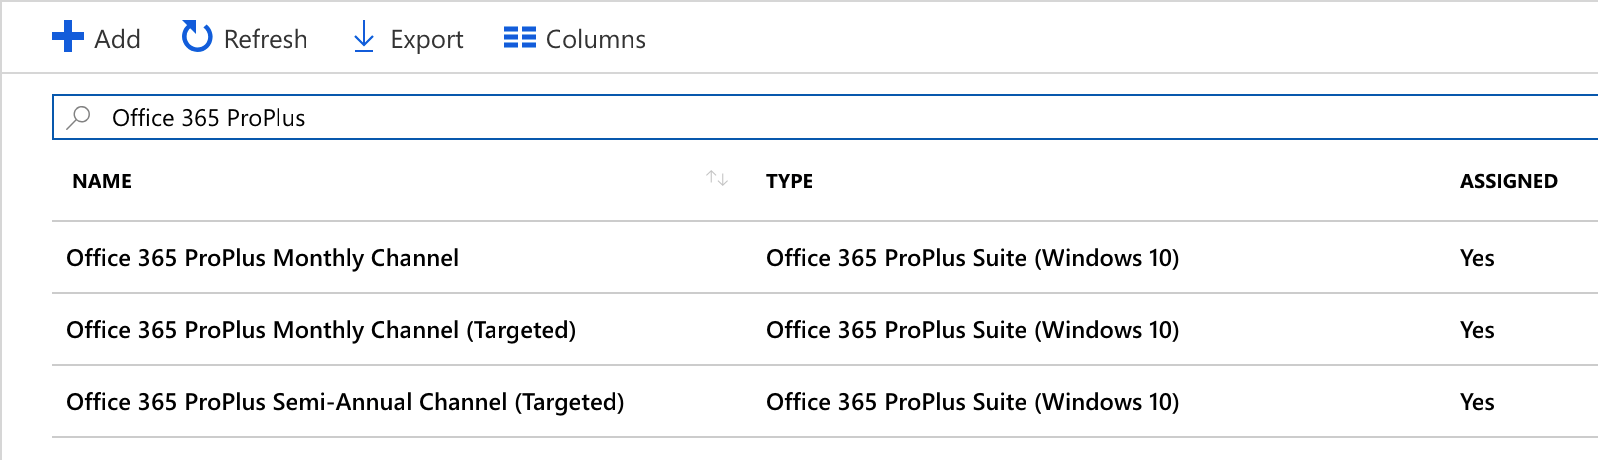 Office 365 ProPlus apps in Intune to manage update channels